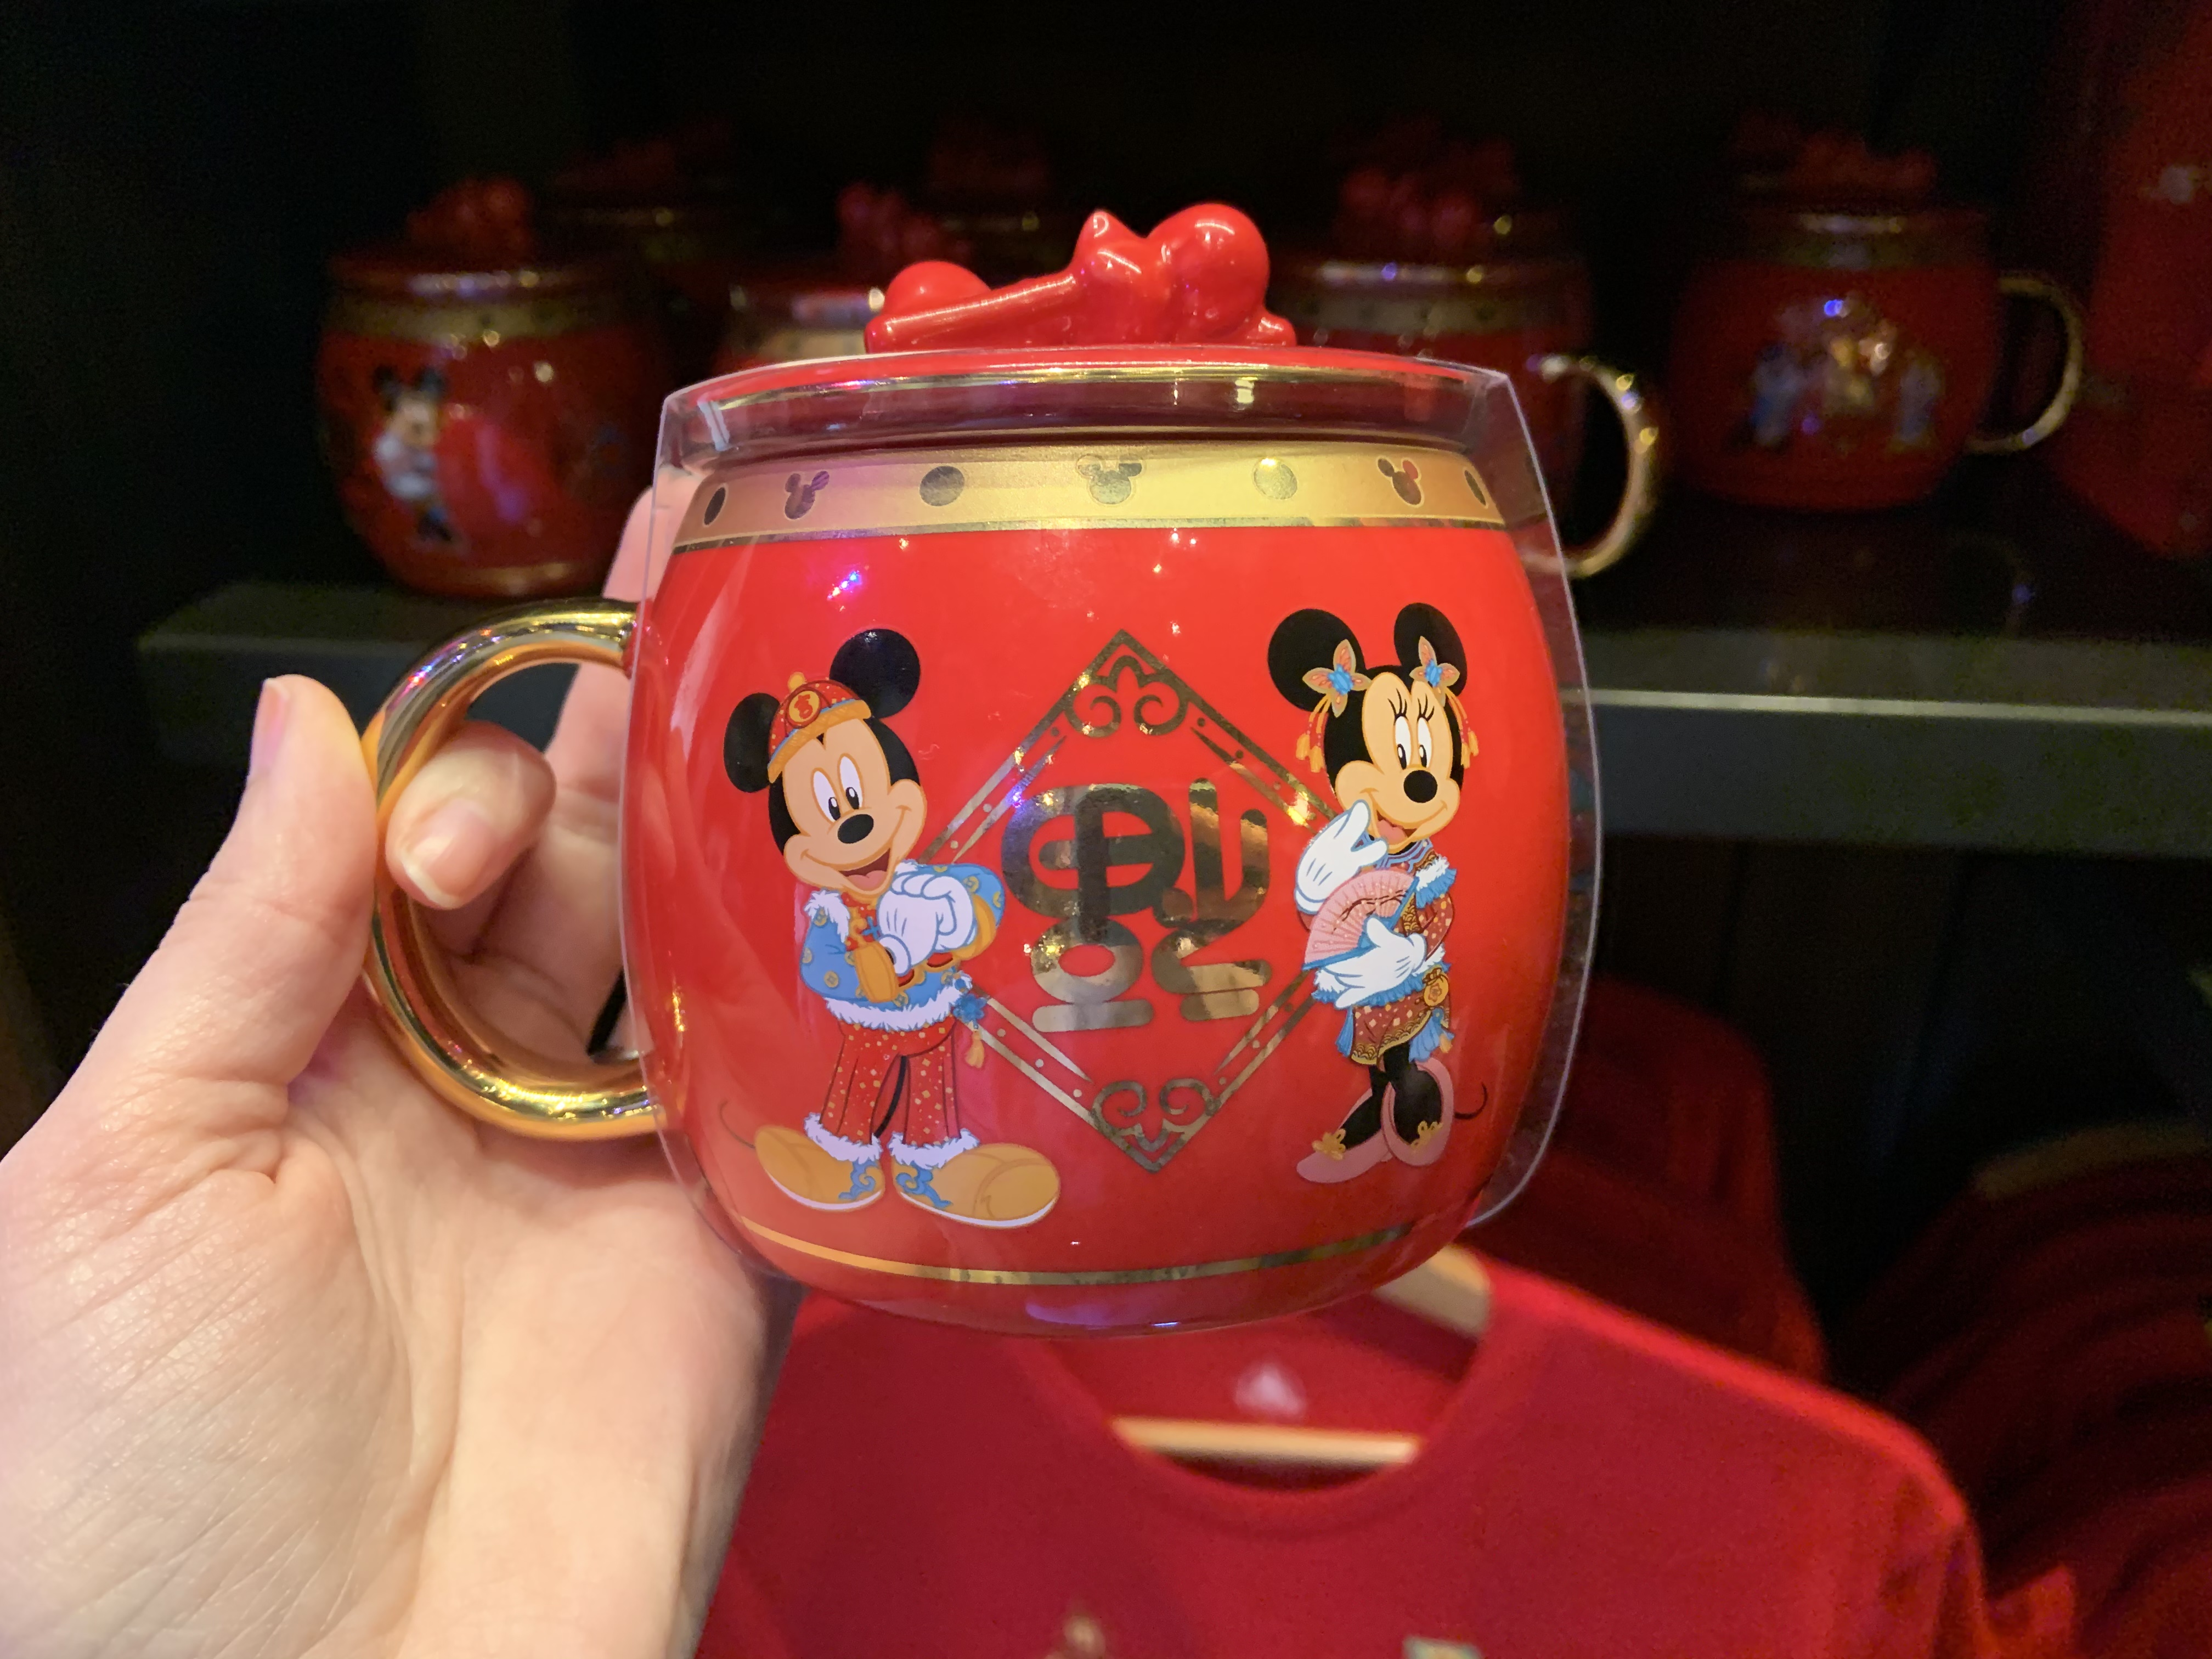 PHOTOS: Lunar New Year Merchandise Celebrates the Year of the Mouse at